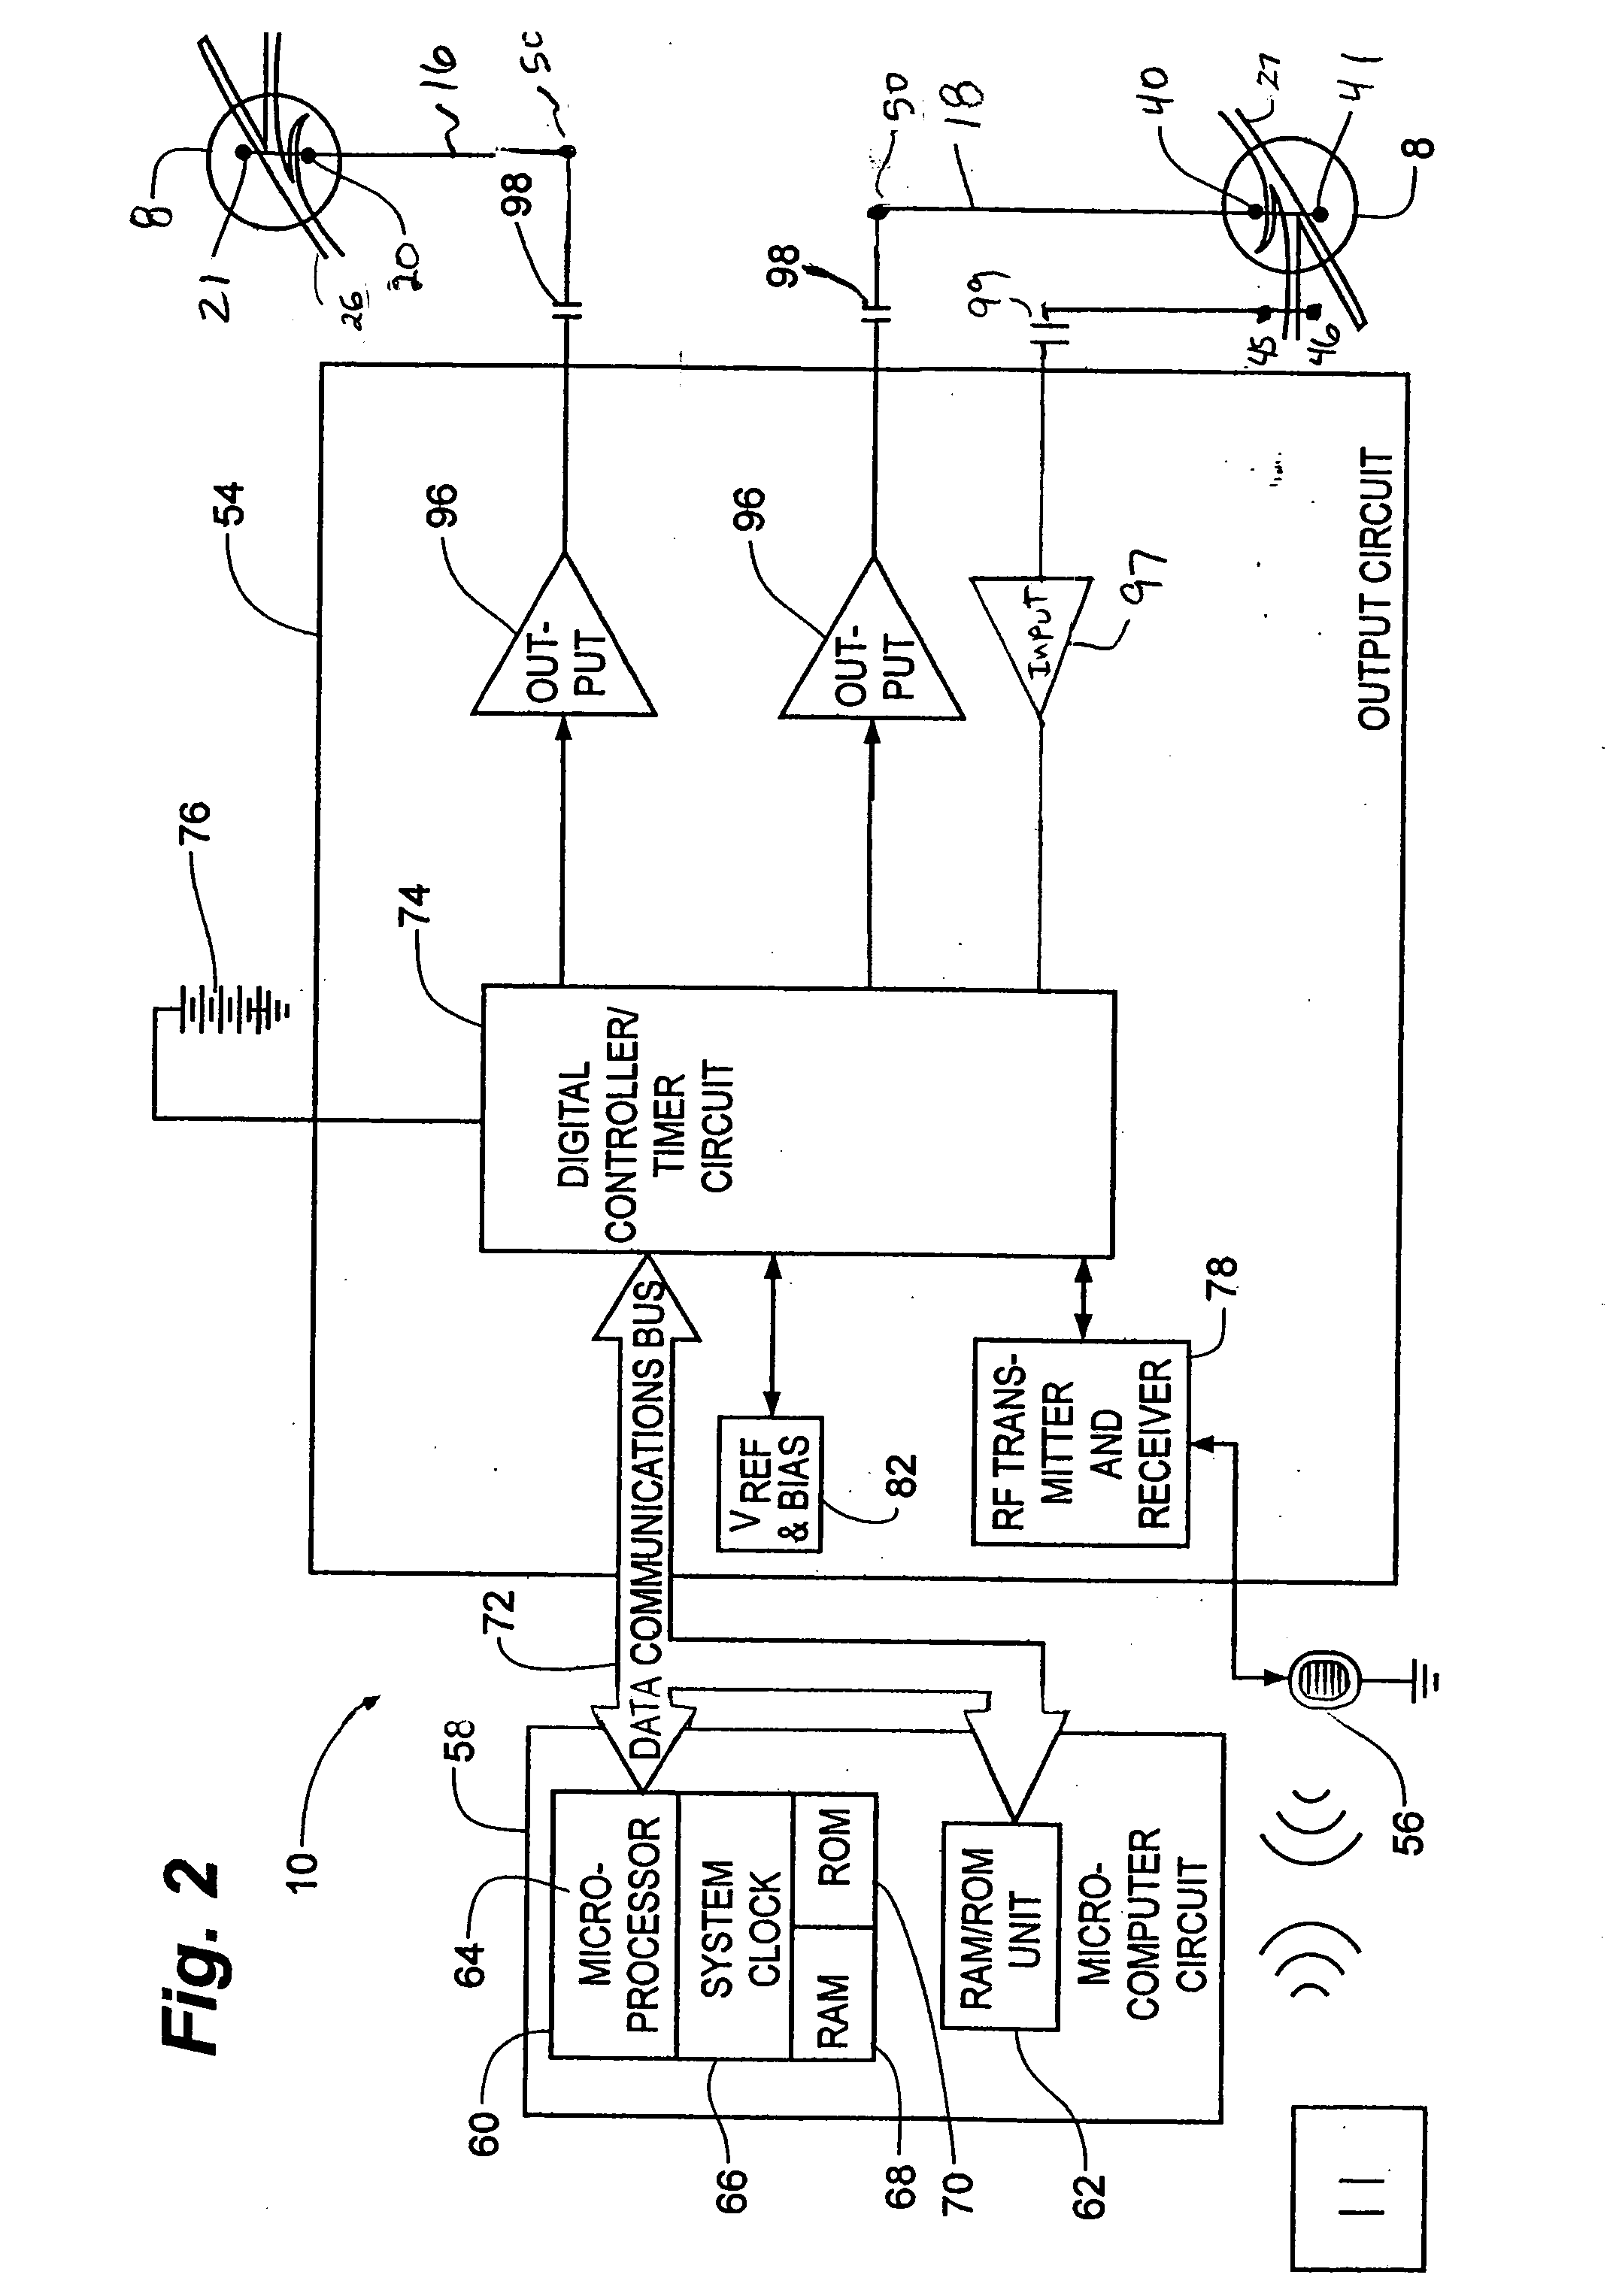 Method, system and device for treating various disorders of the pelvic floor by electrical stimulation of the left and right pudendal nerves